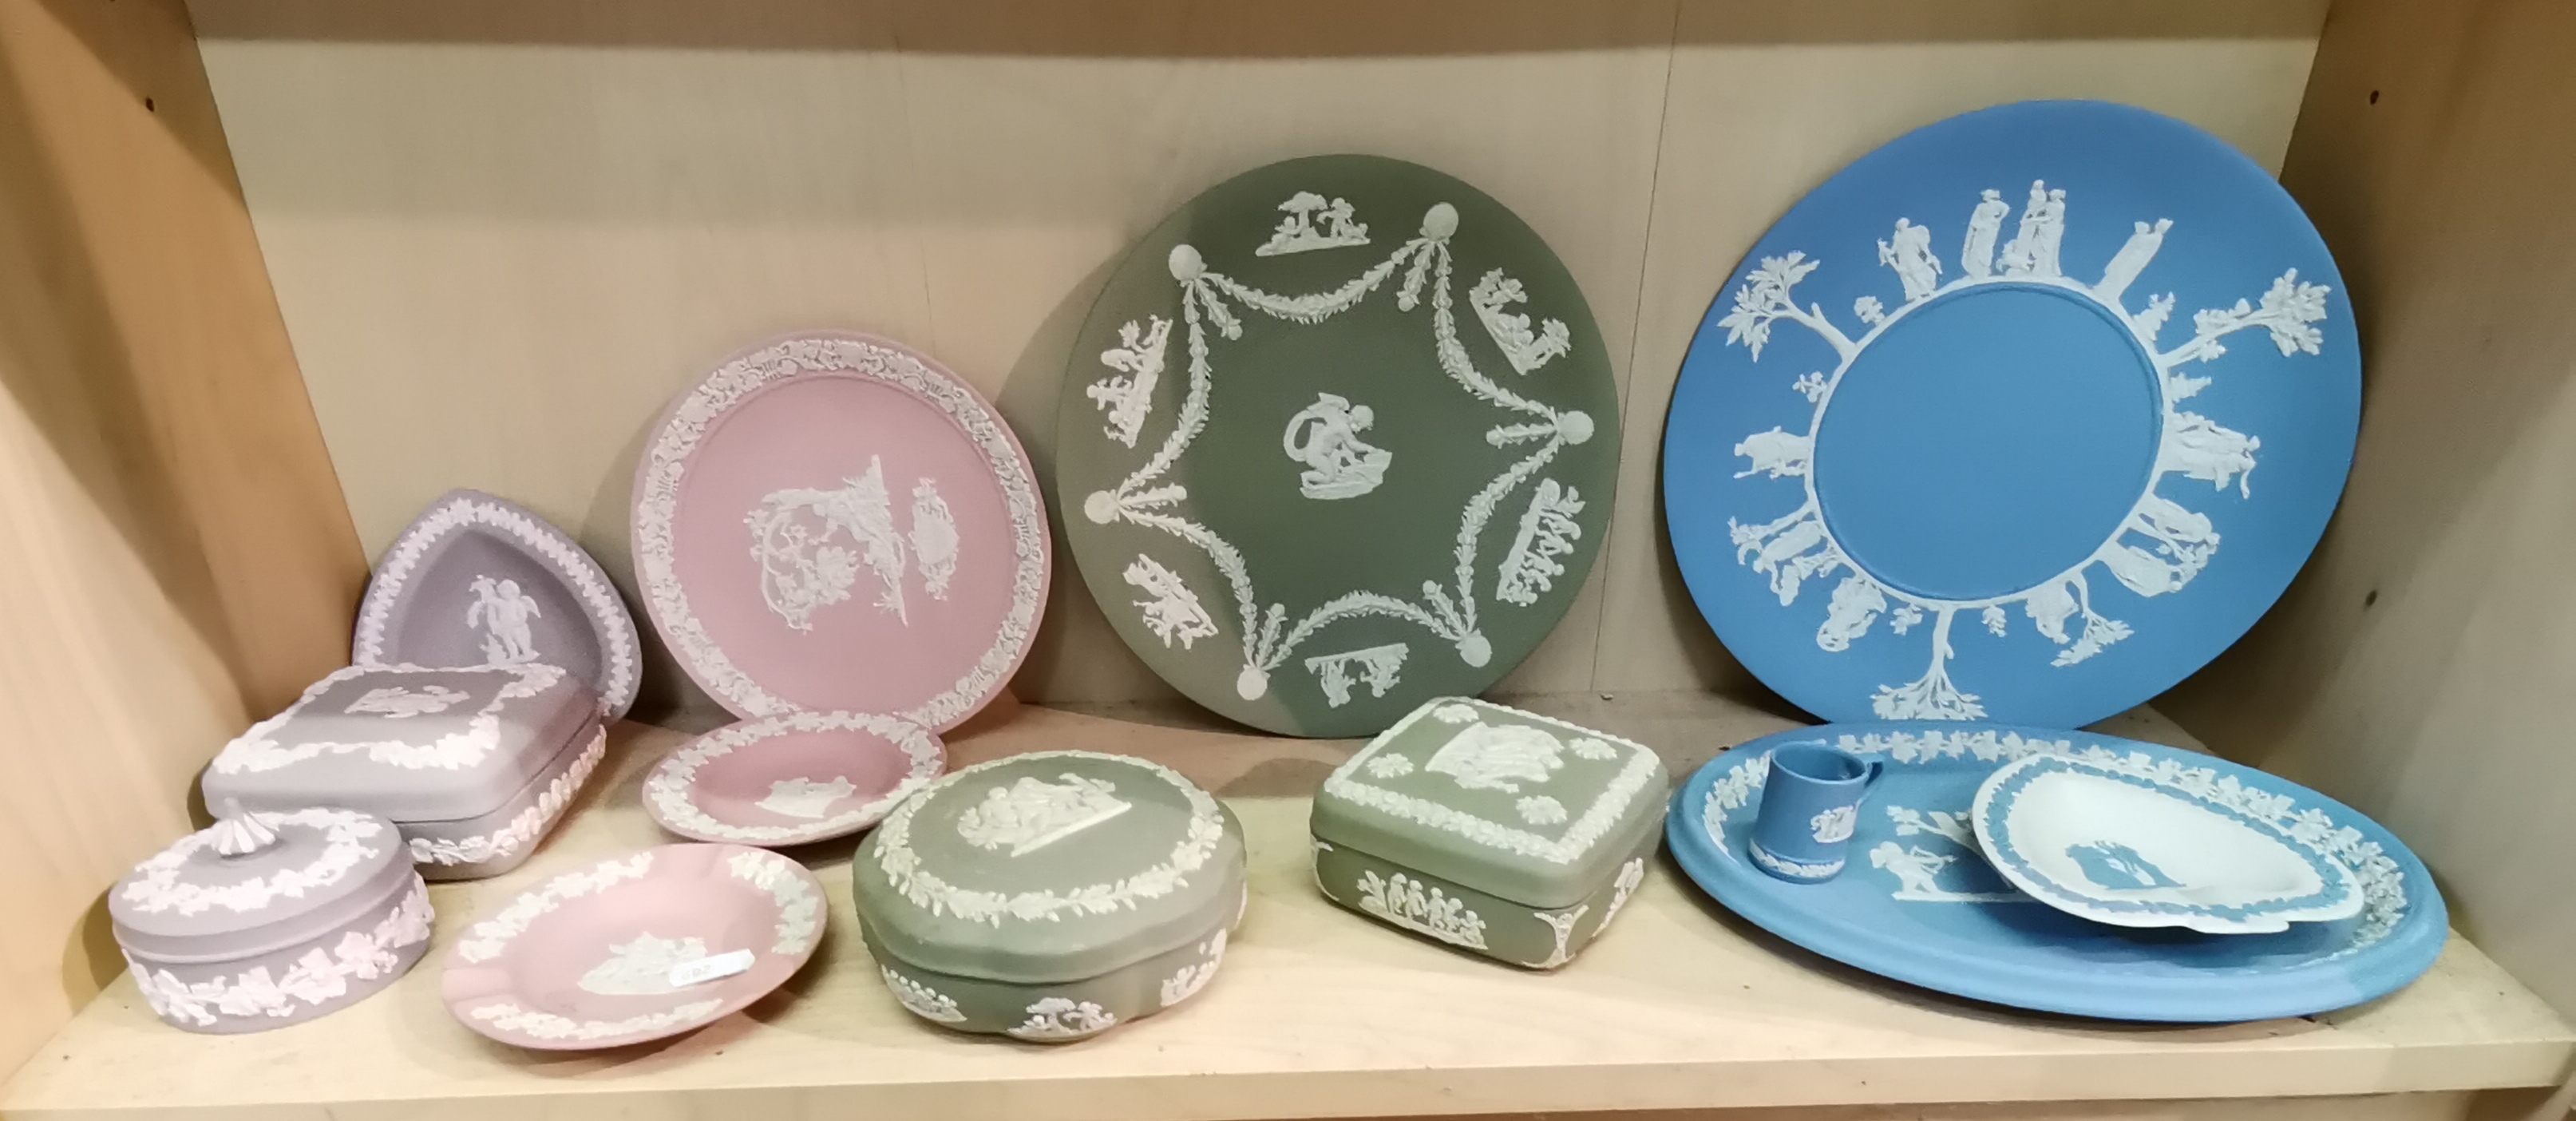 Wedgwood Jasperware pieces in green, blue and pale pink